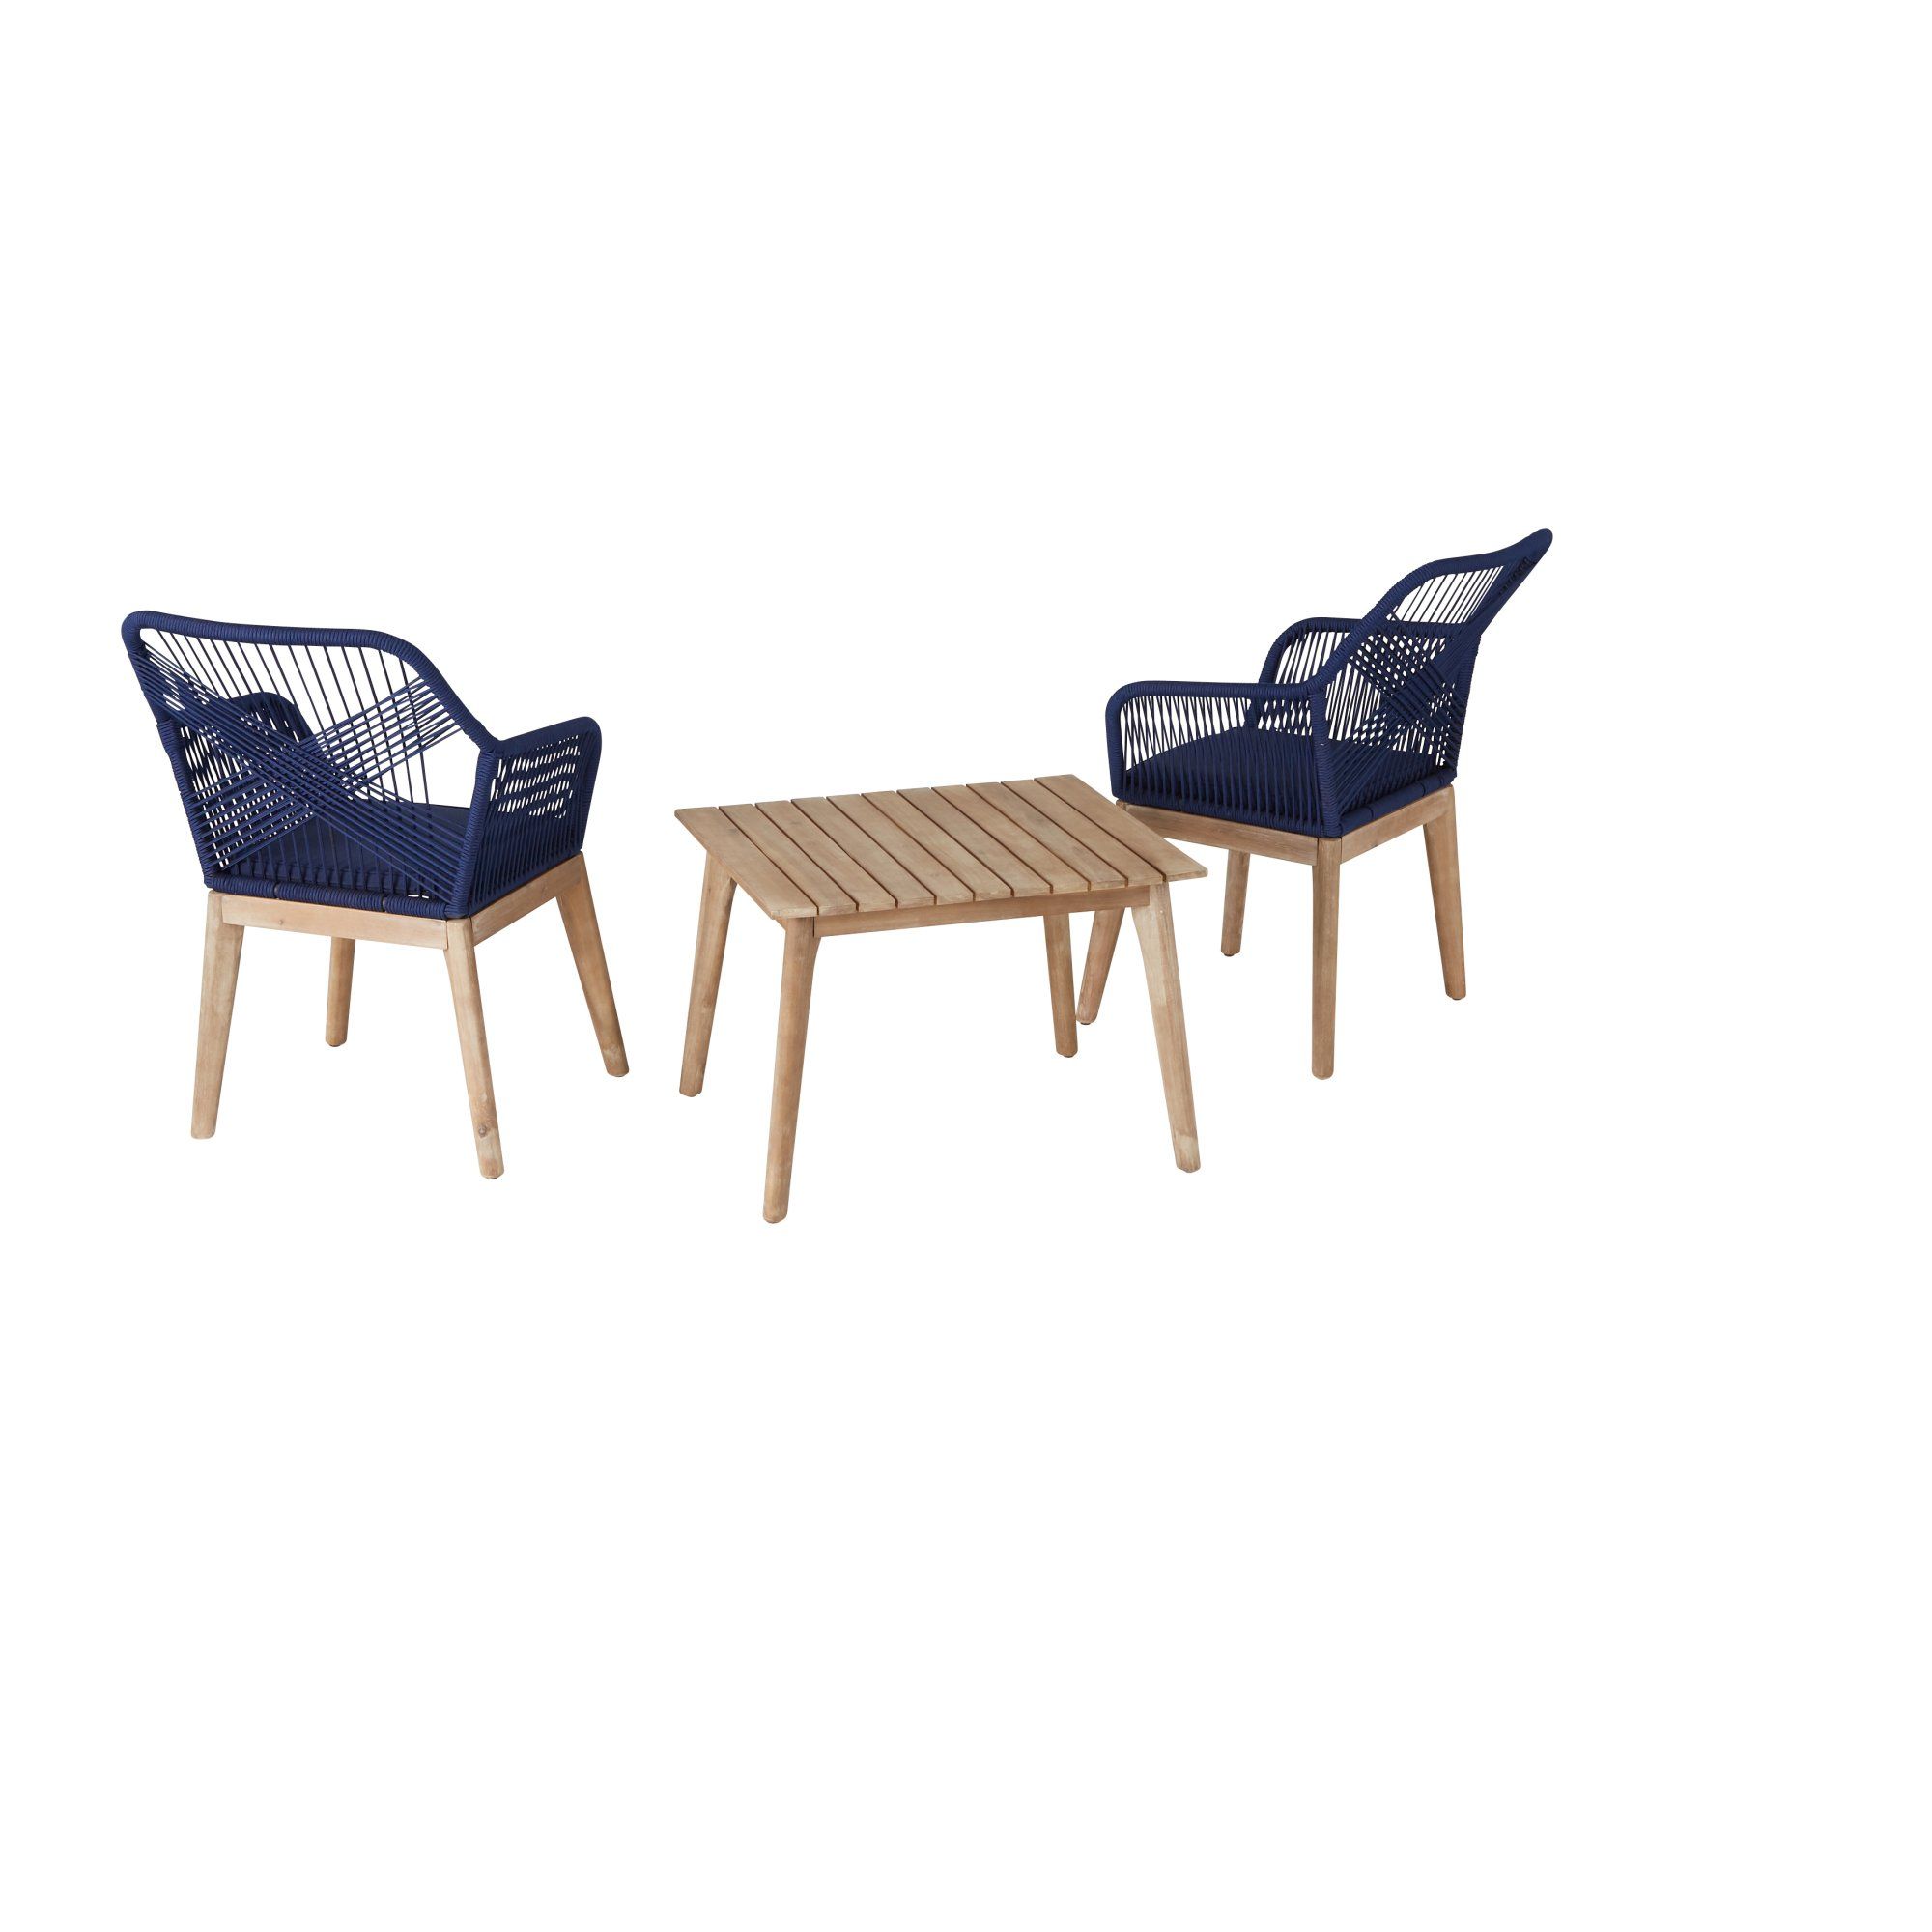 Gap Home Woven Rope Outdoor 3 Piece Conversation Set, Navy – Walmart For Woven Rope Outdoor 3 Piece Conversation Set (View 4 of 15)